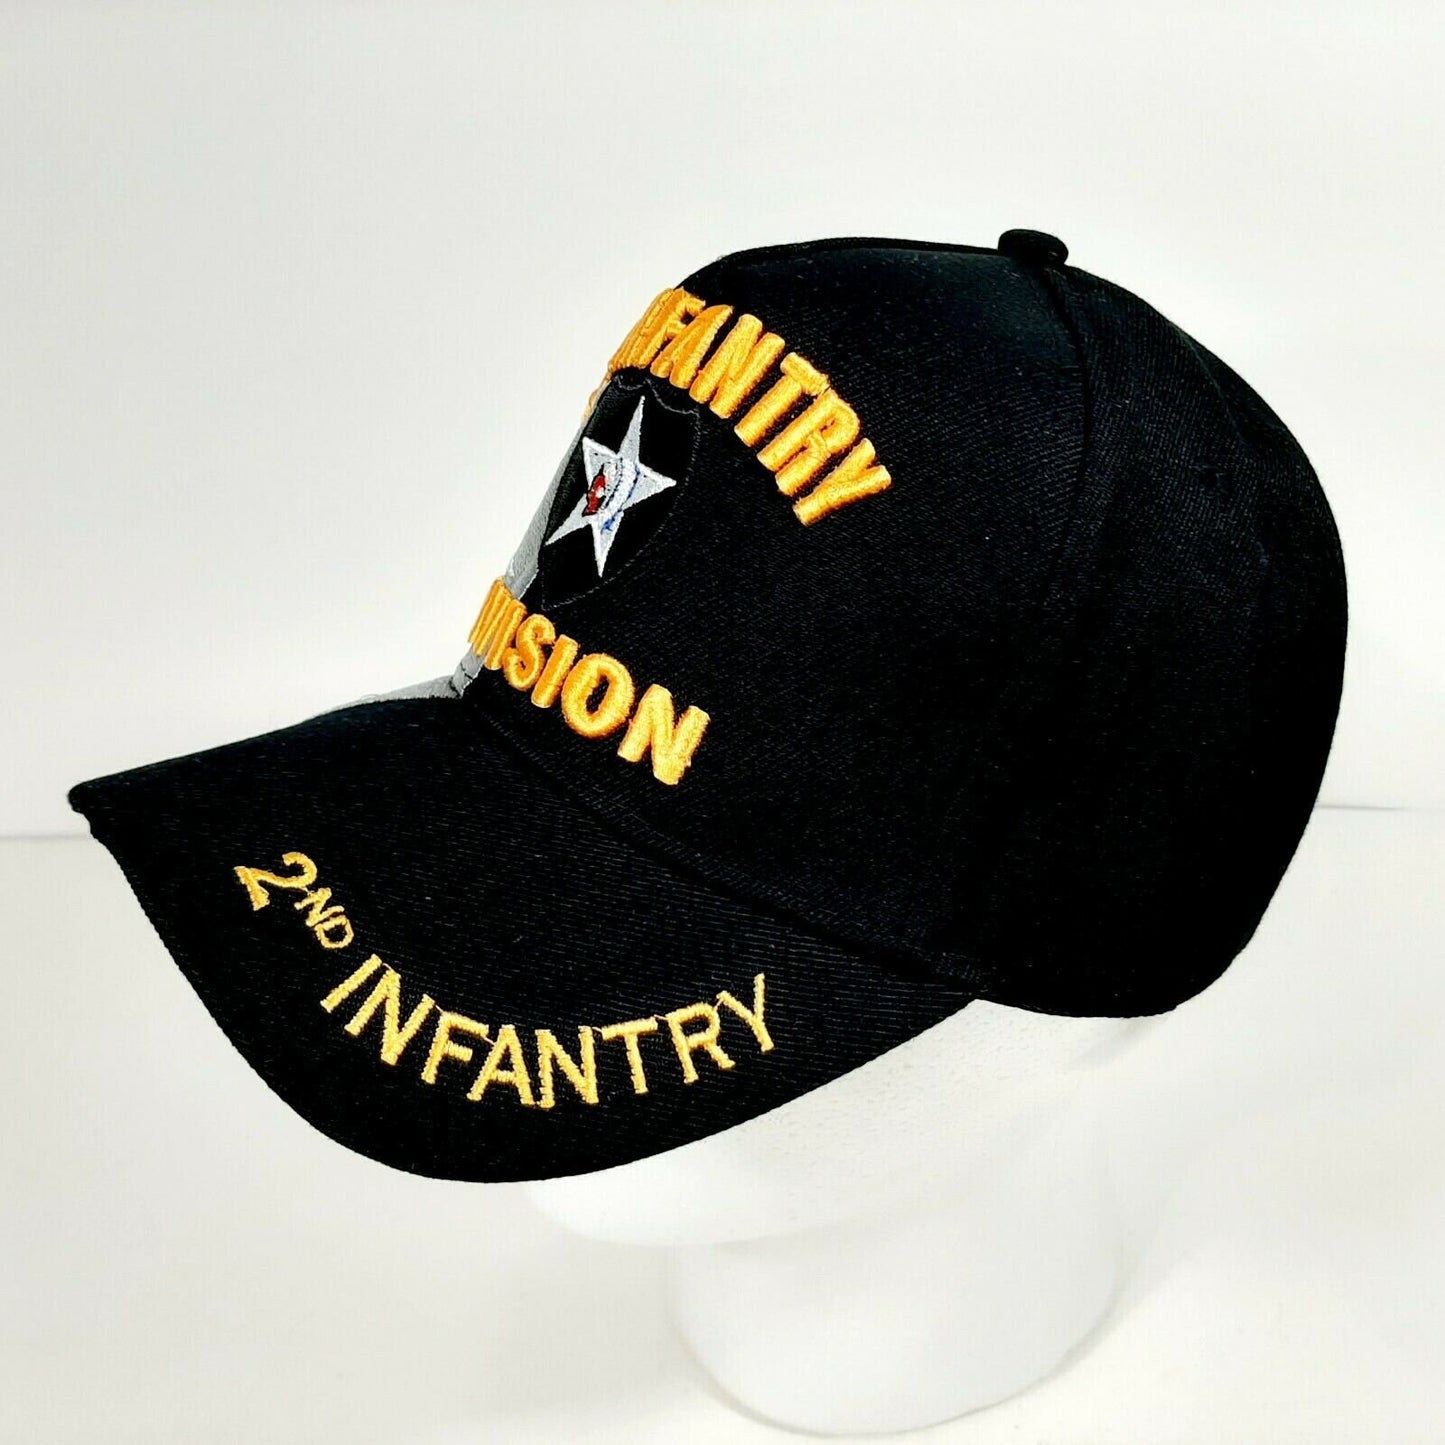 US Army 2nd Infantry Division Men's Ball Cap Hat Black Embroidered Acrylic